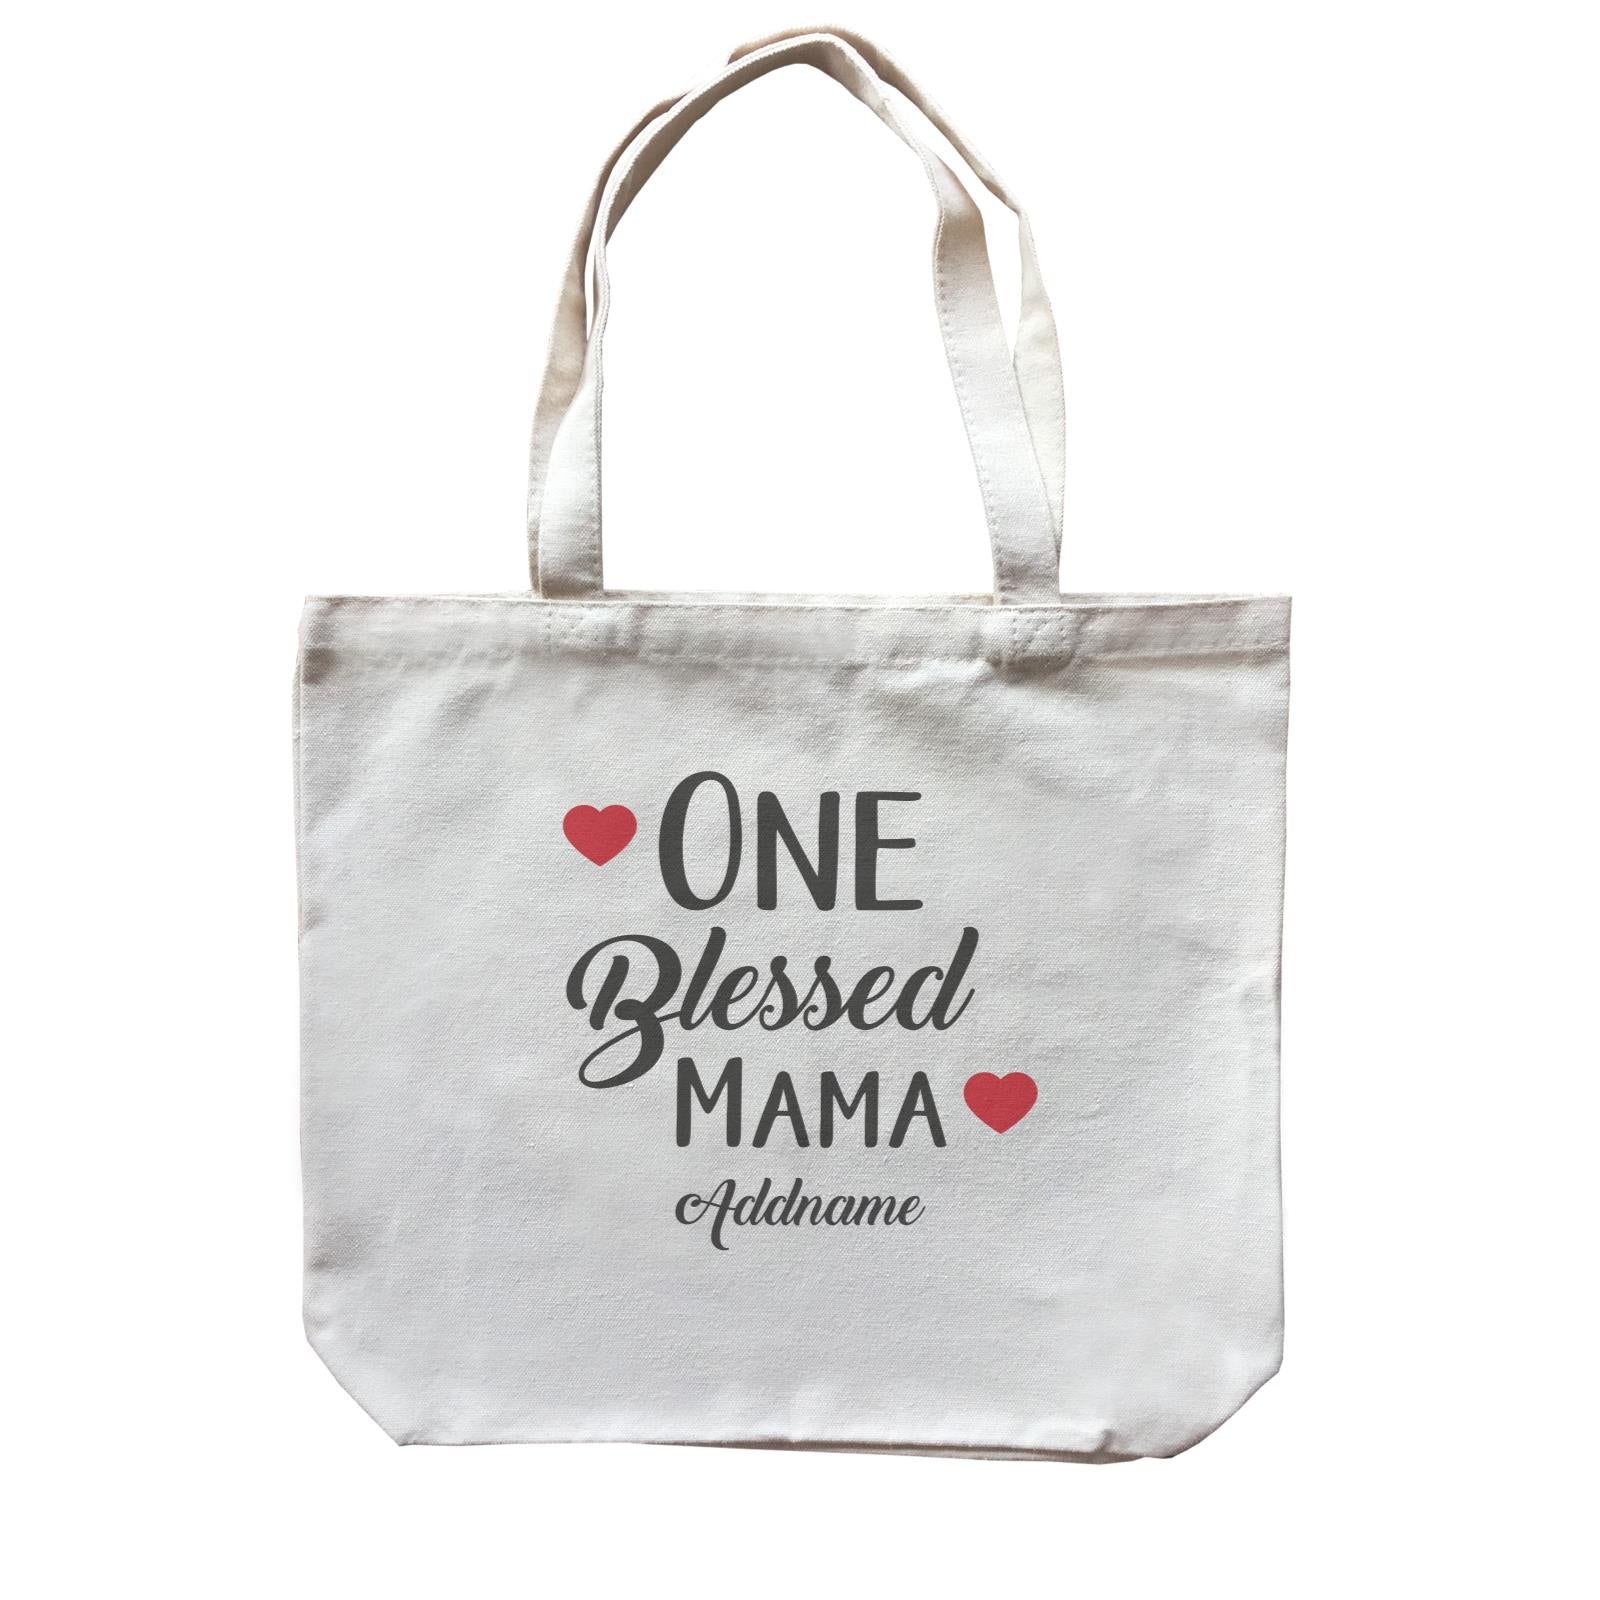 Christian Series One Blessed Mama Addname Canvas Bag